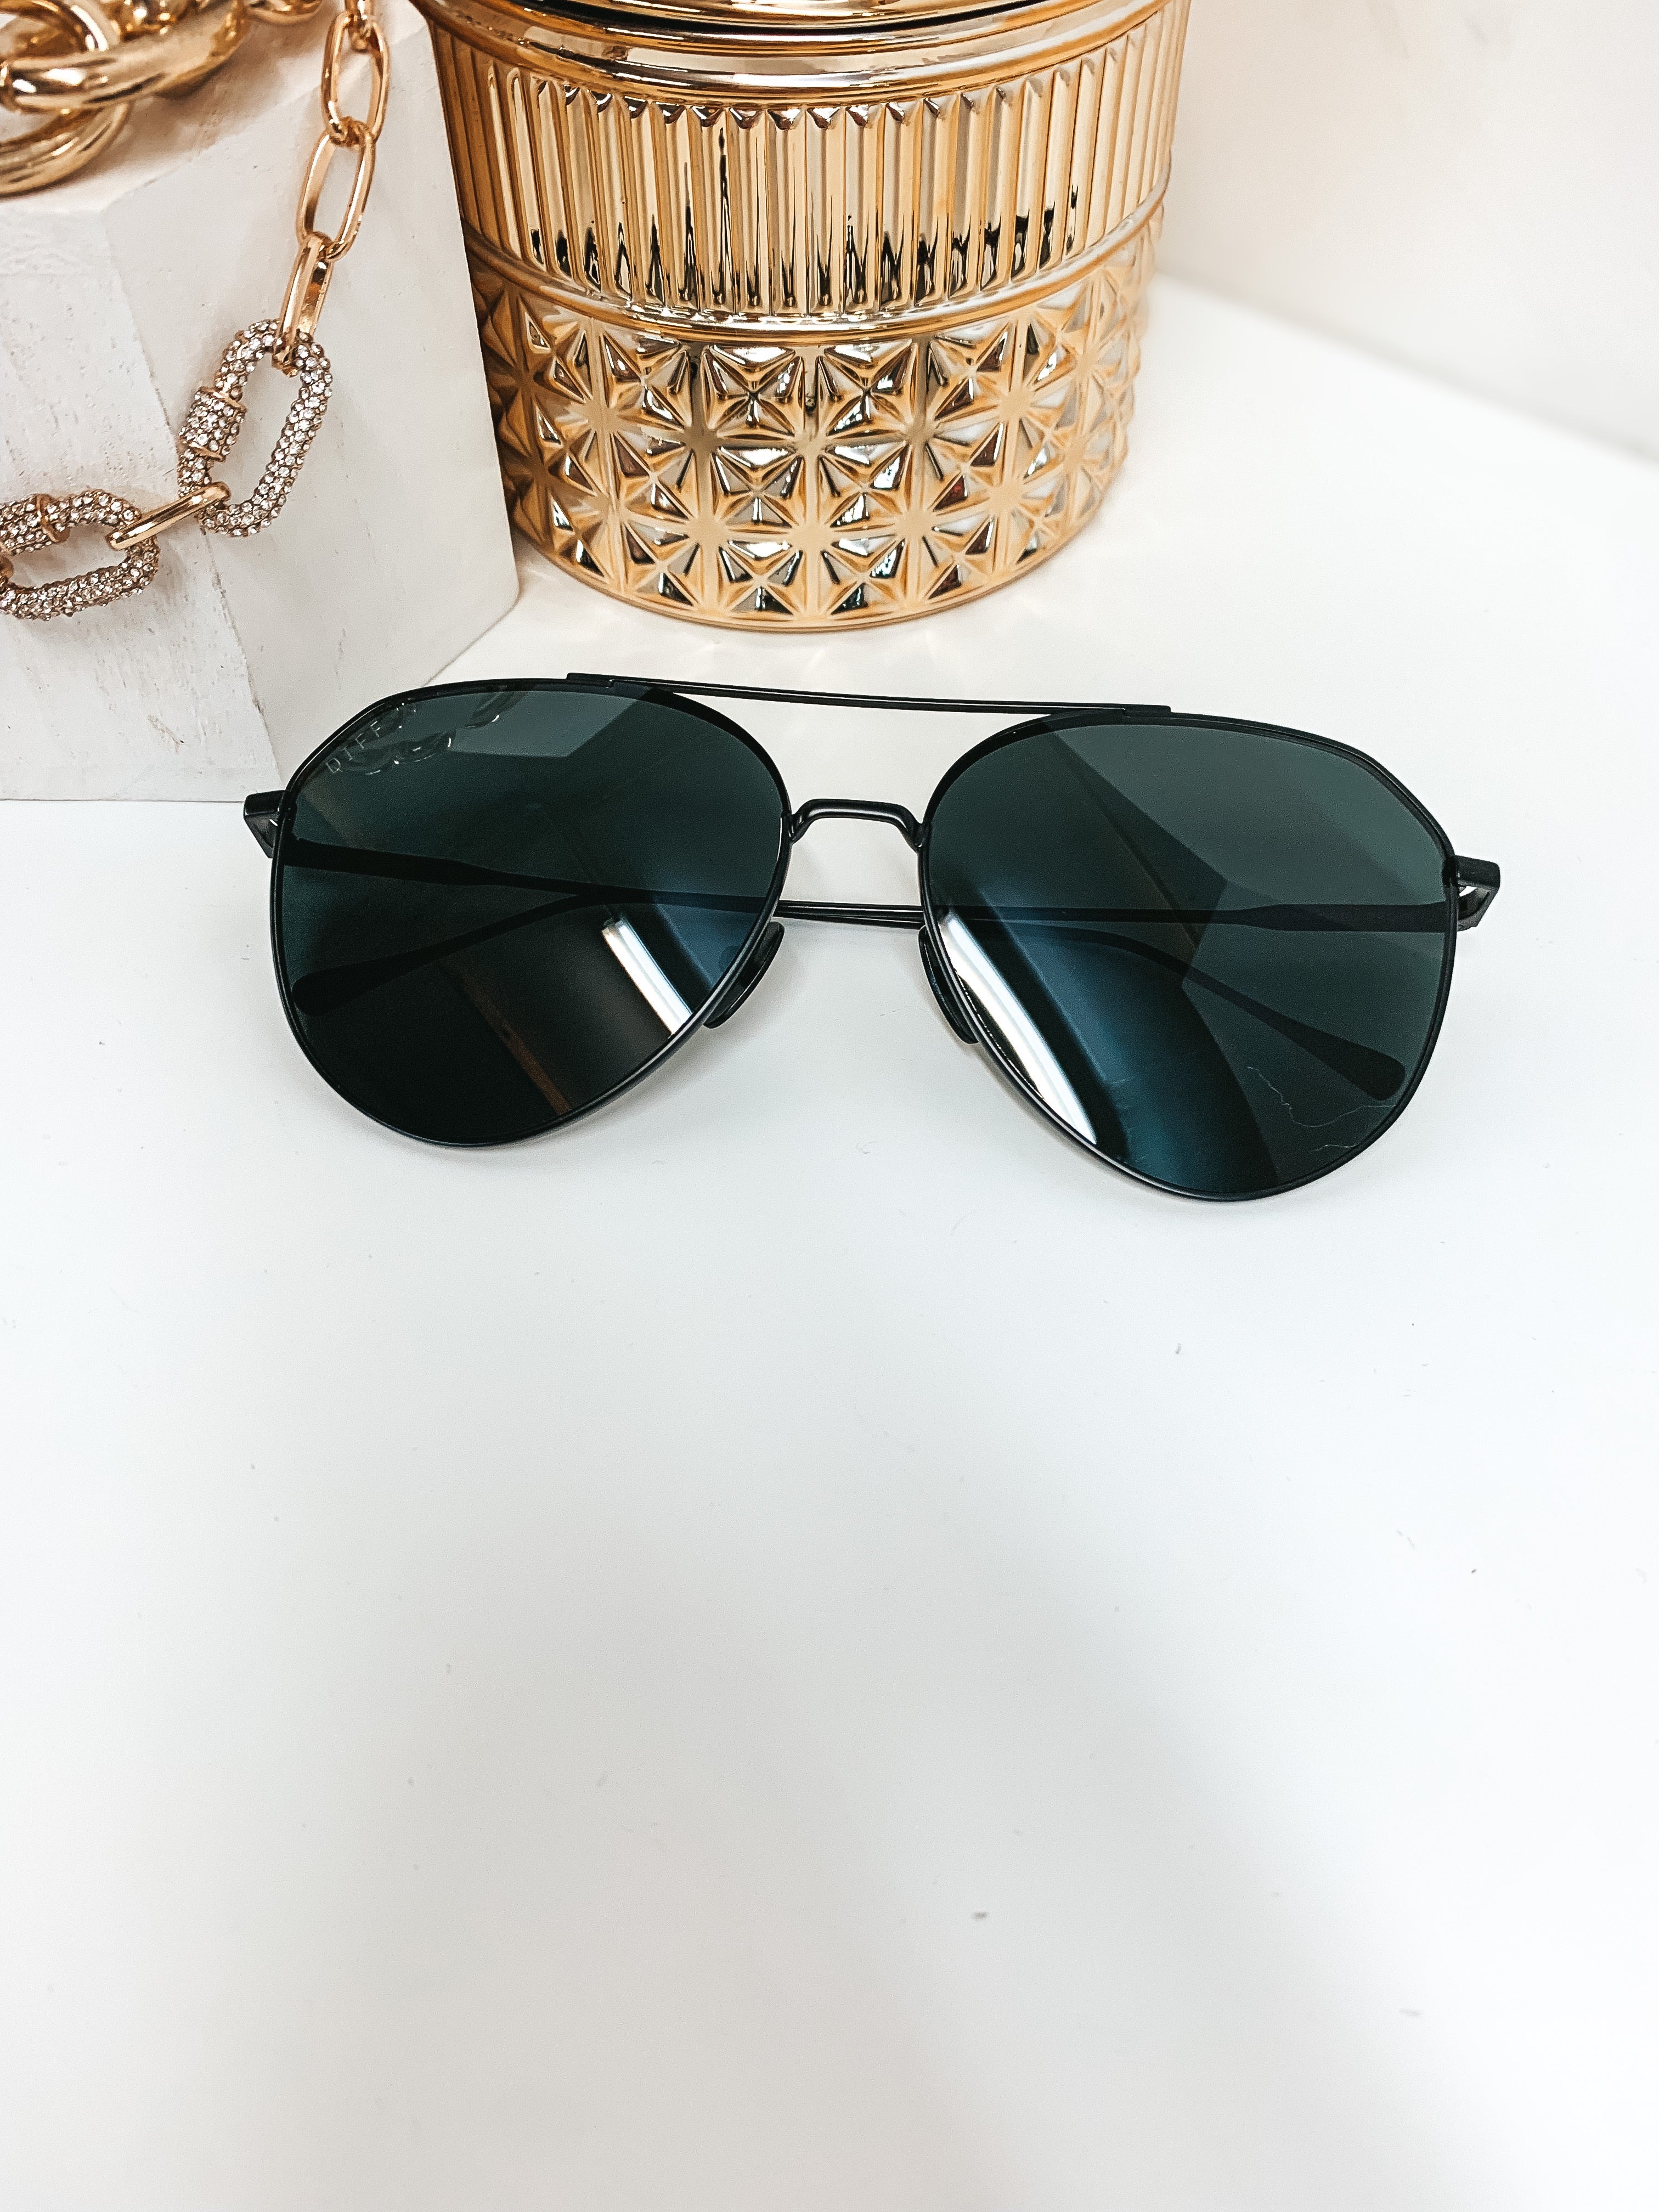 DIFF | Dash Polarized Black Lens Sunglasses in Matte Black - Giddy Up Glamour Boutique